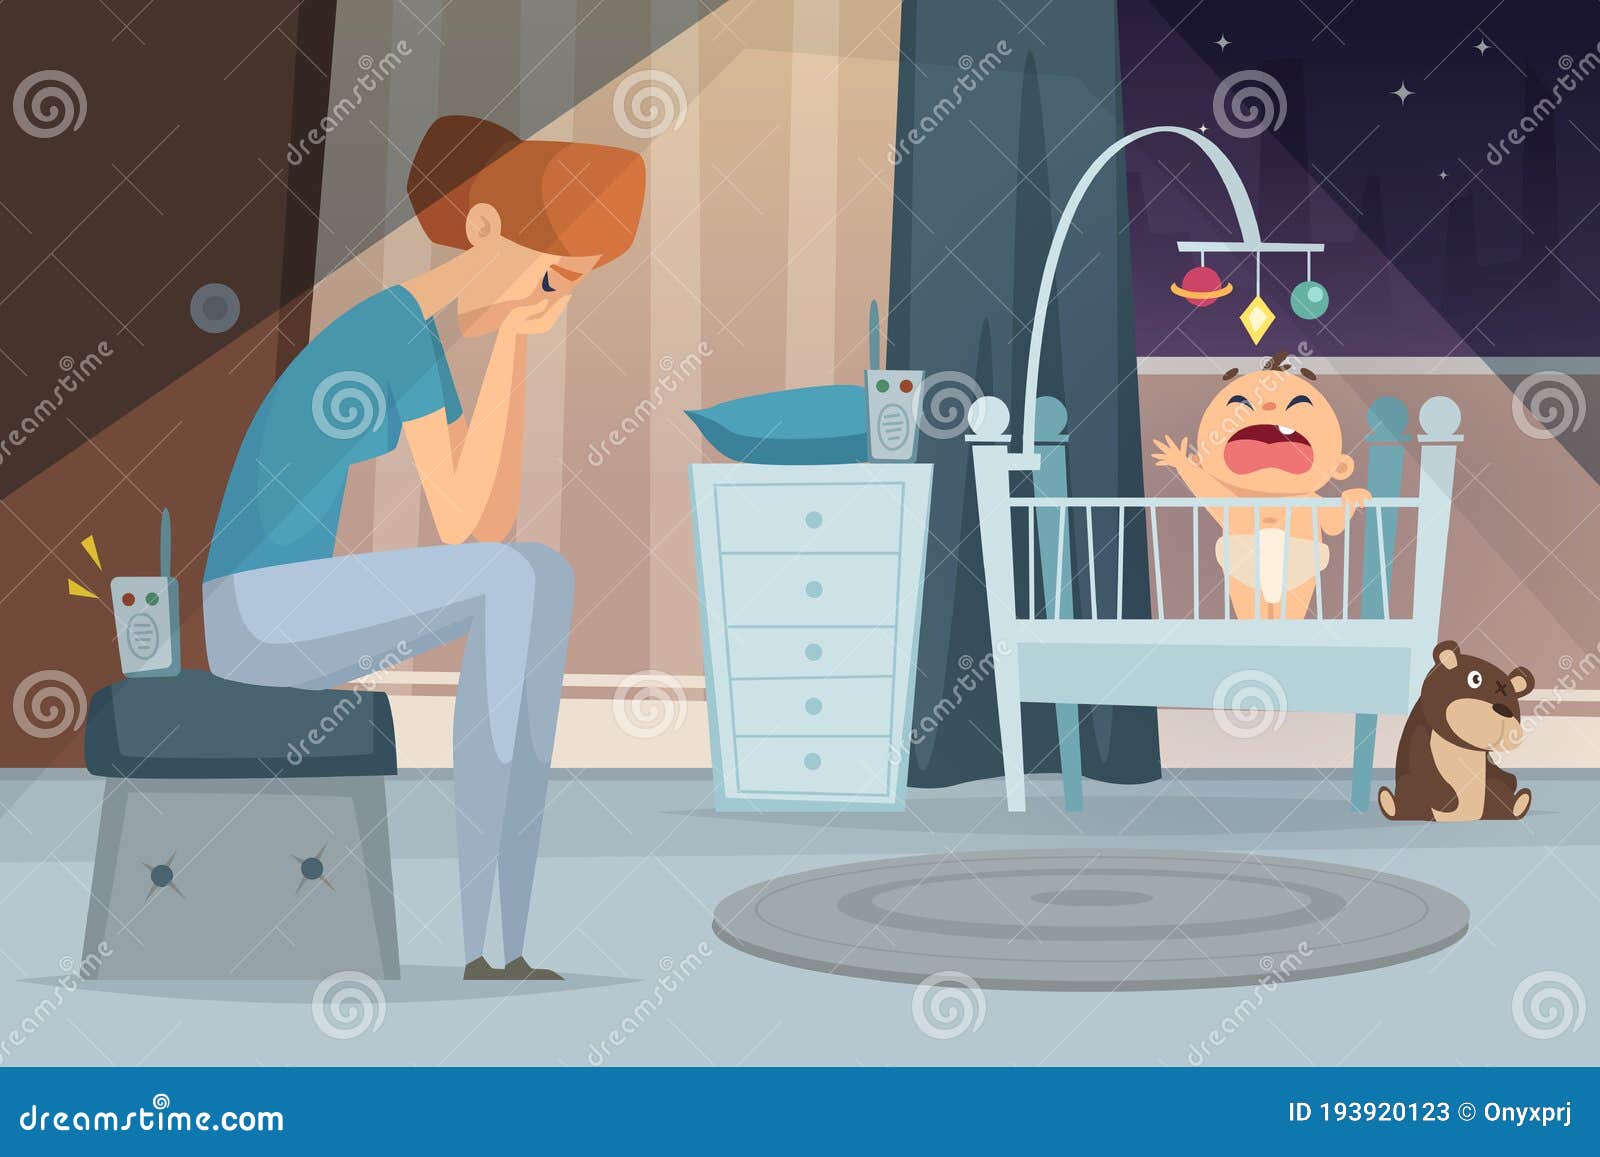 Depressing Mother. Tired Woman Sitting Near Screaming Baby in Bed Sick  Child Vector Cartoon Background Stock Vector - Illustration of childcare,  depressed: 193920123